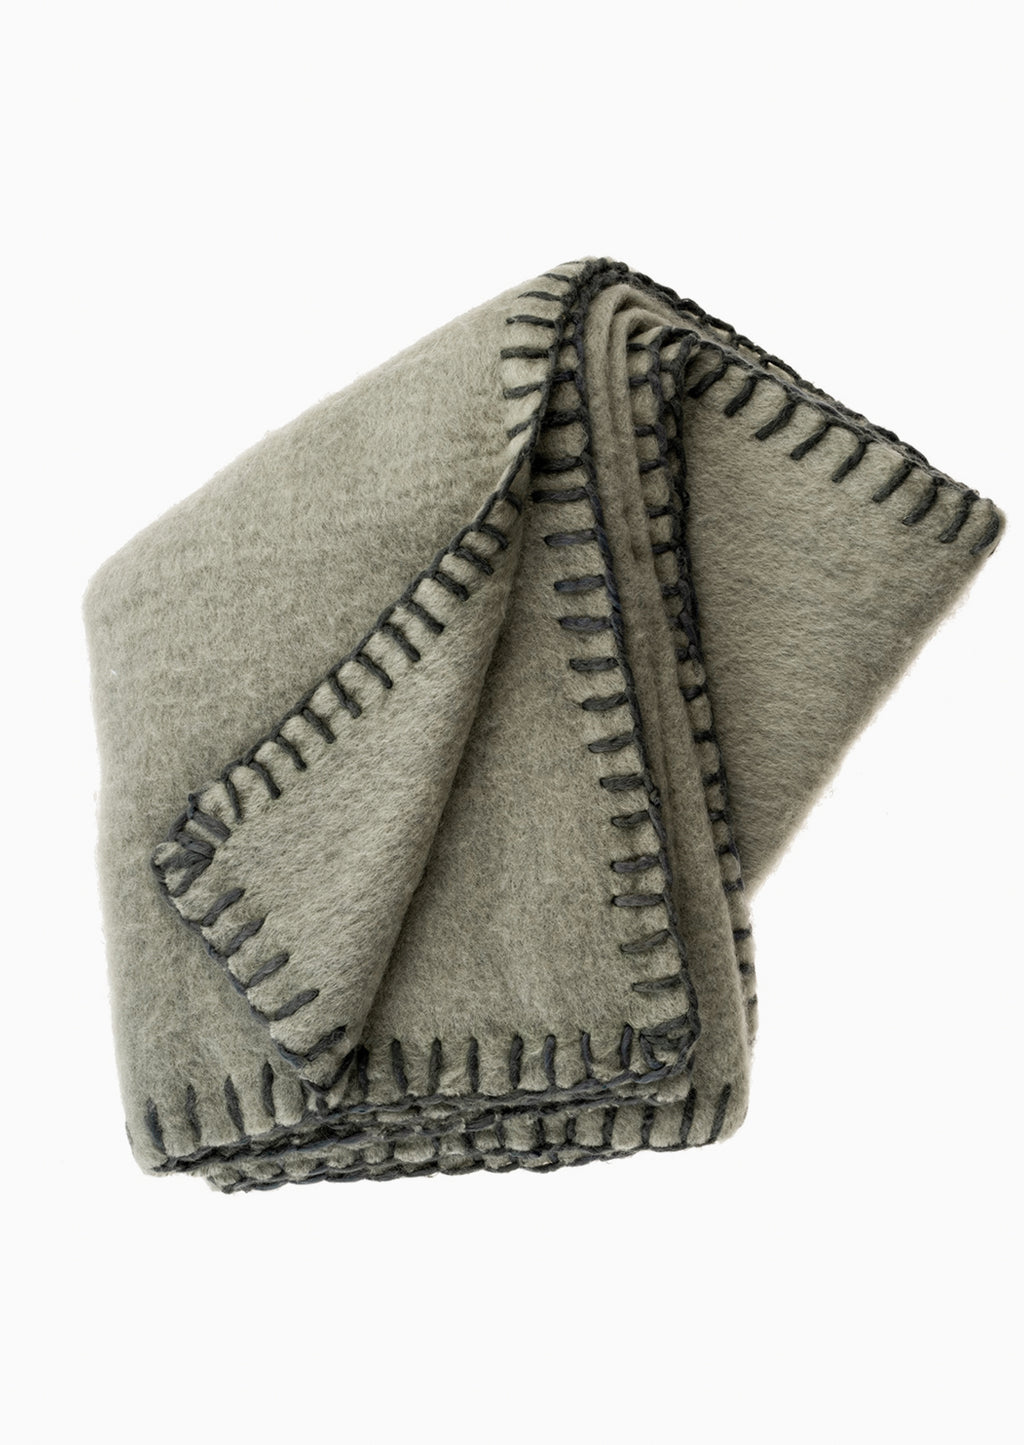 6: A sage mohair blanket with olive yarn whipstitched trim.